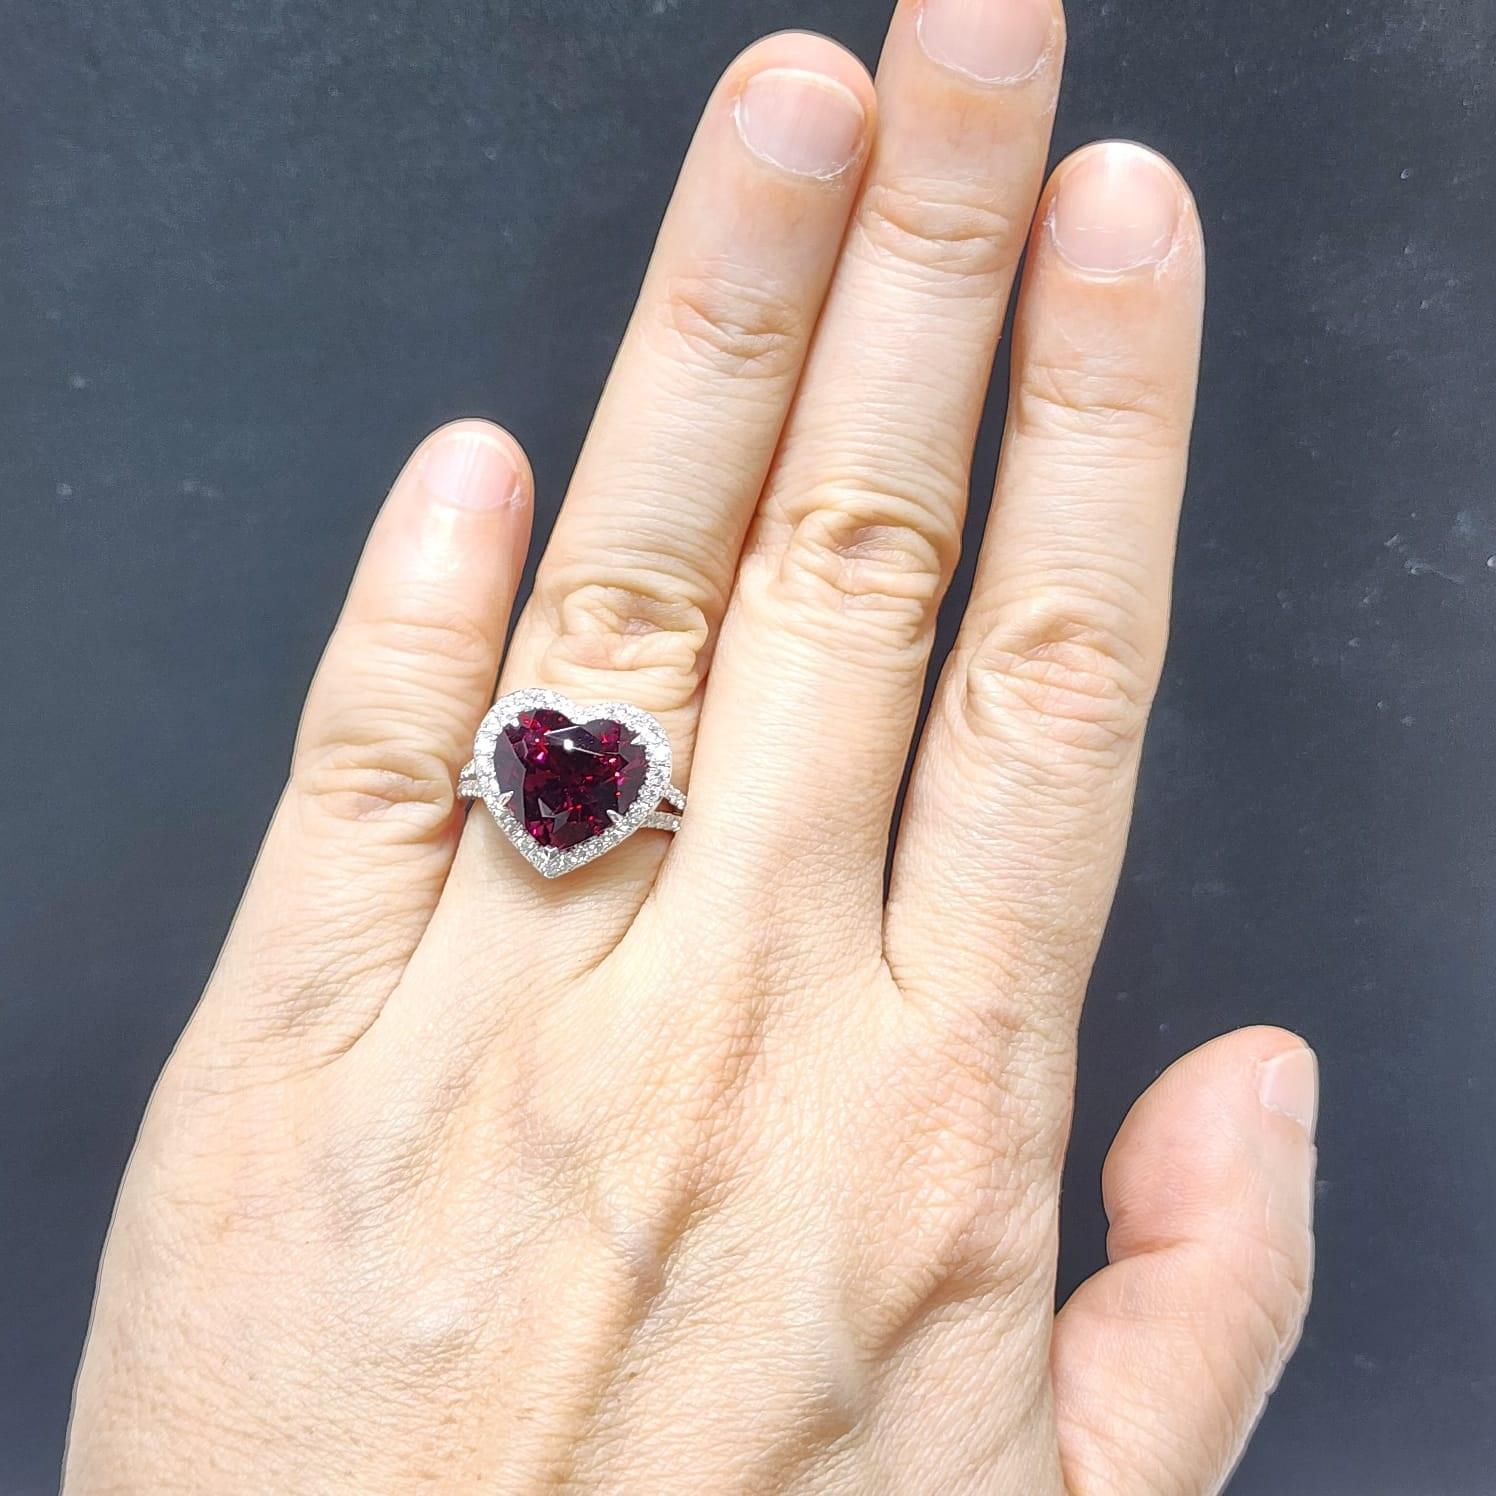 GIA Certified 7.37 Carat Heart Garnet and Diamond Ring in 18K White Gold For Sale 3